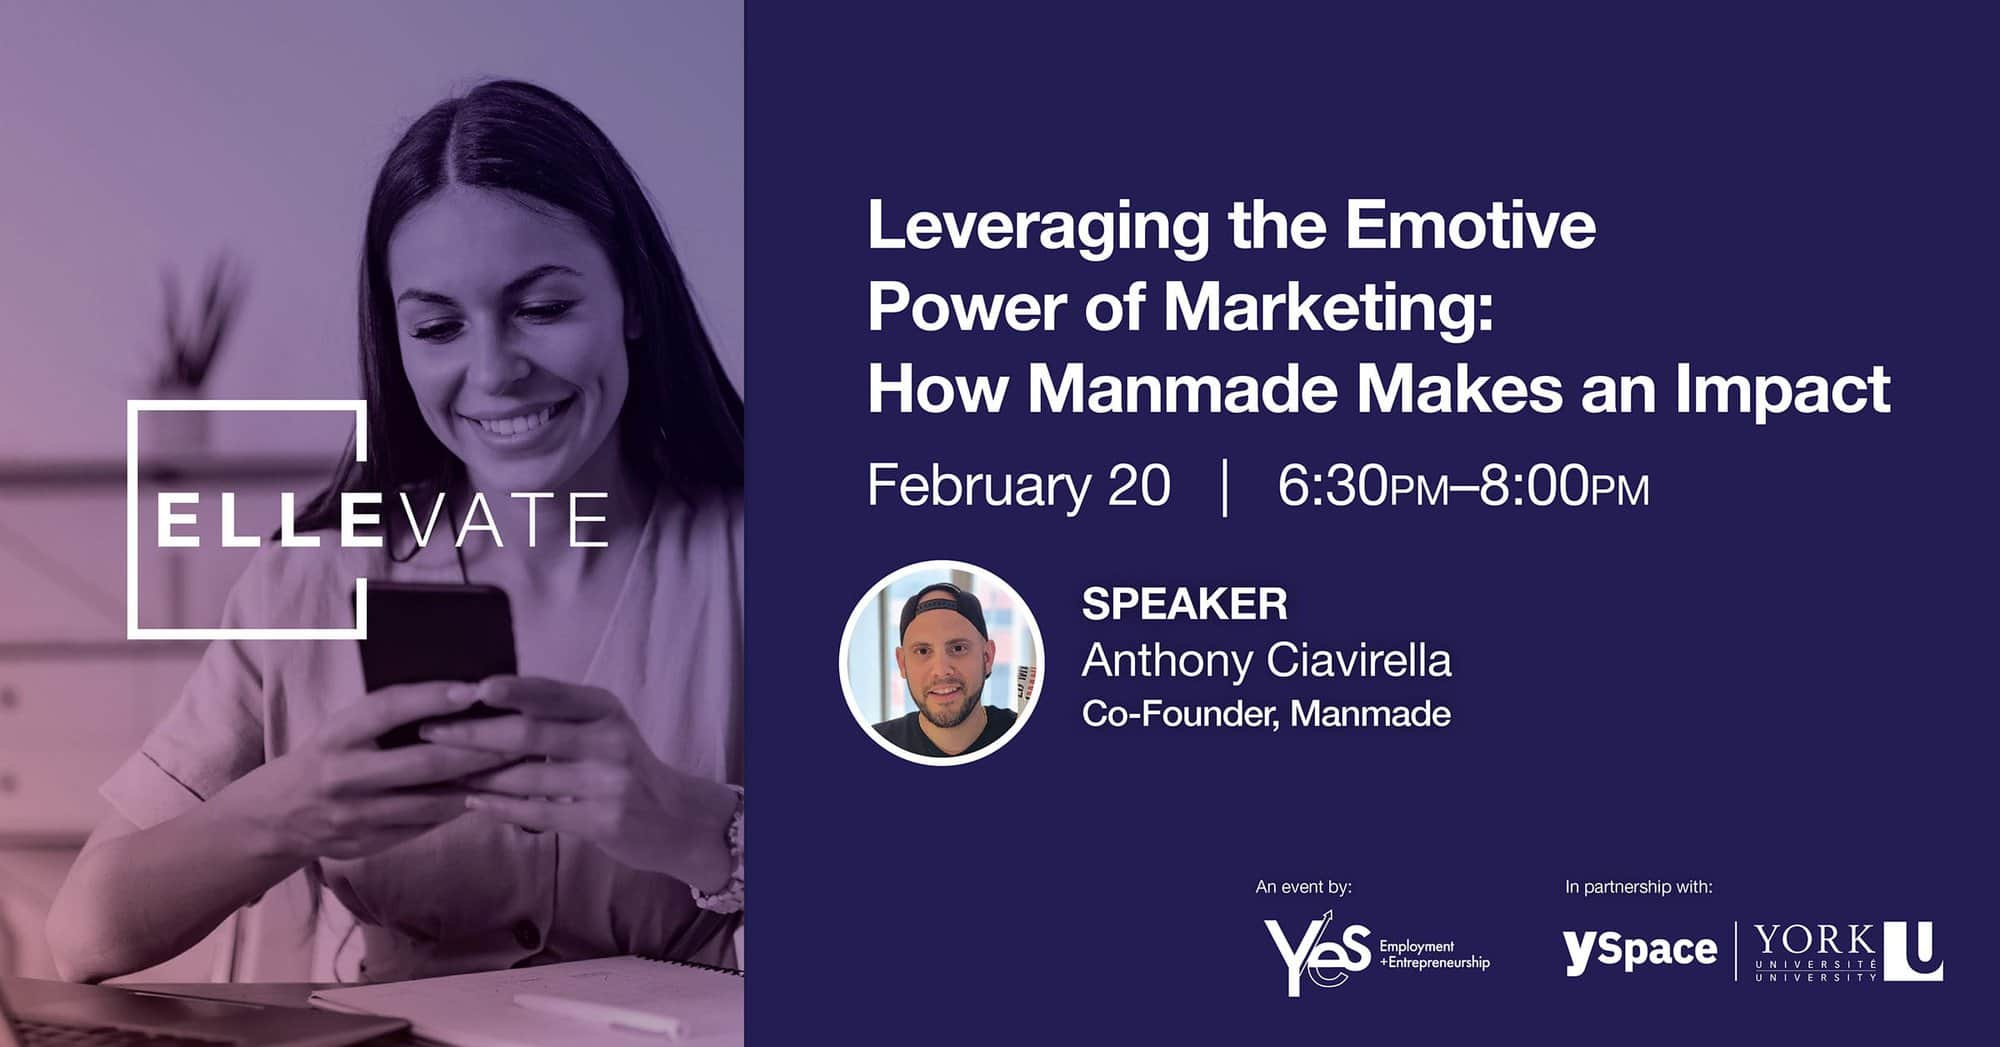 Leveraging the Emotive Power of Marketing: How Manmade Makes an Impact